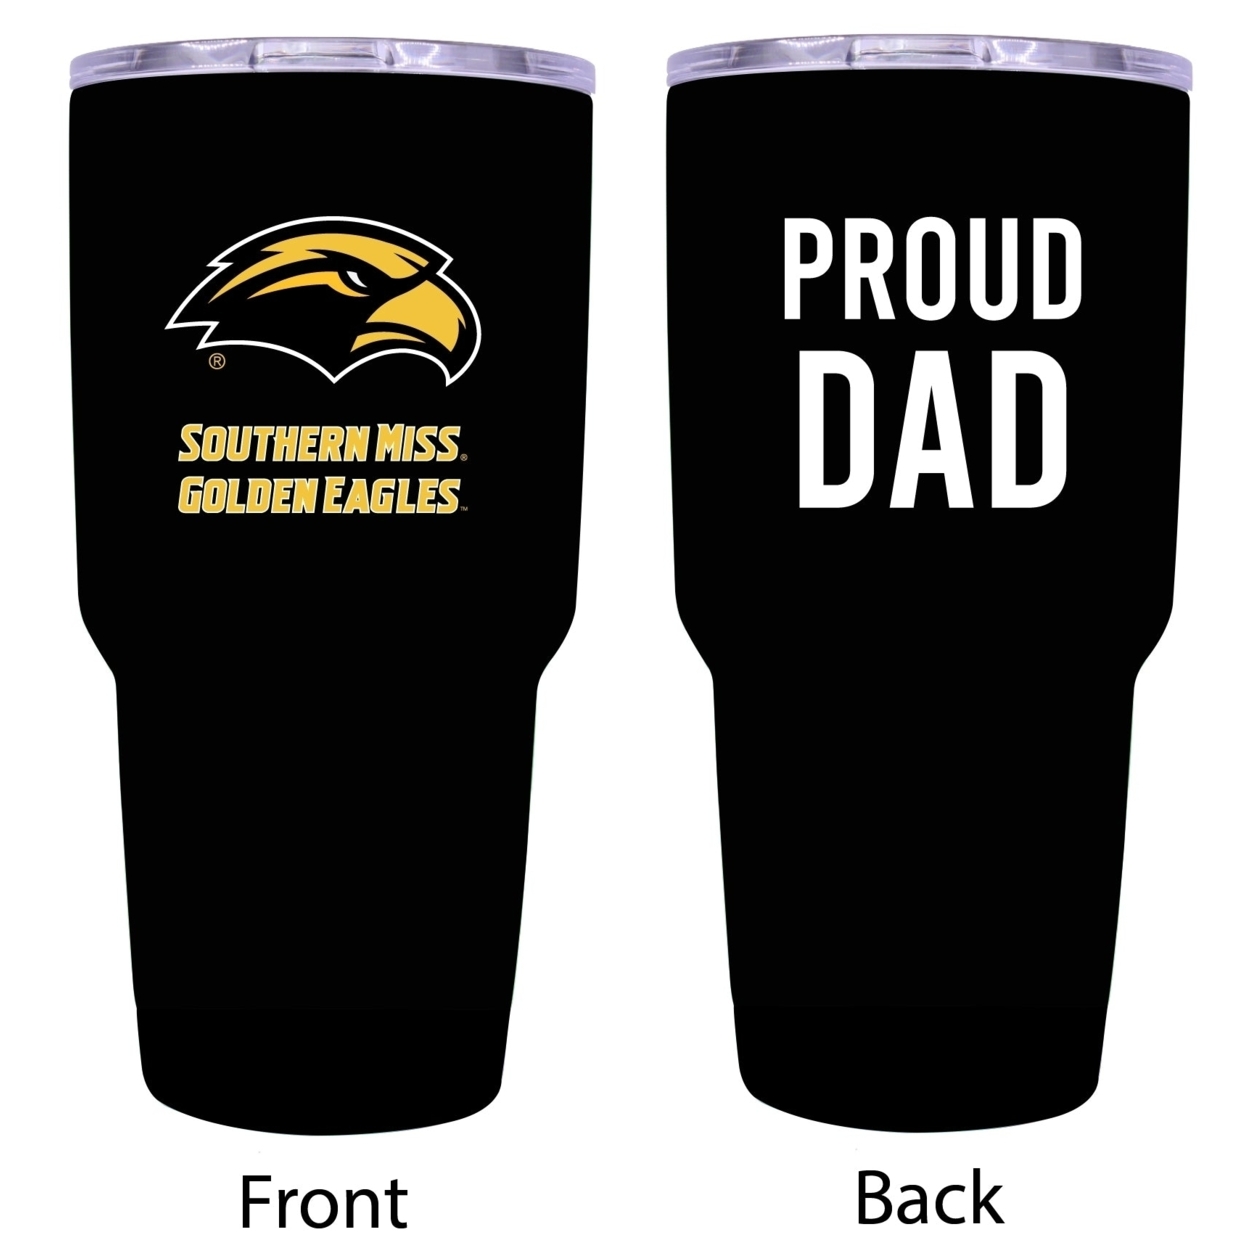 Southern Mississippi Golden Eagles Proud Dad 24 Oz Insulated Stainless Steel Tumblers Choose Your Color.